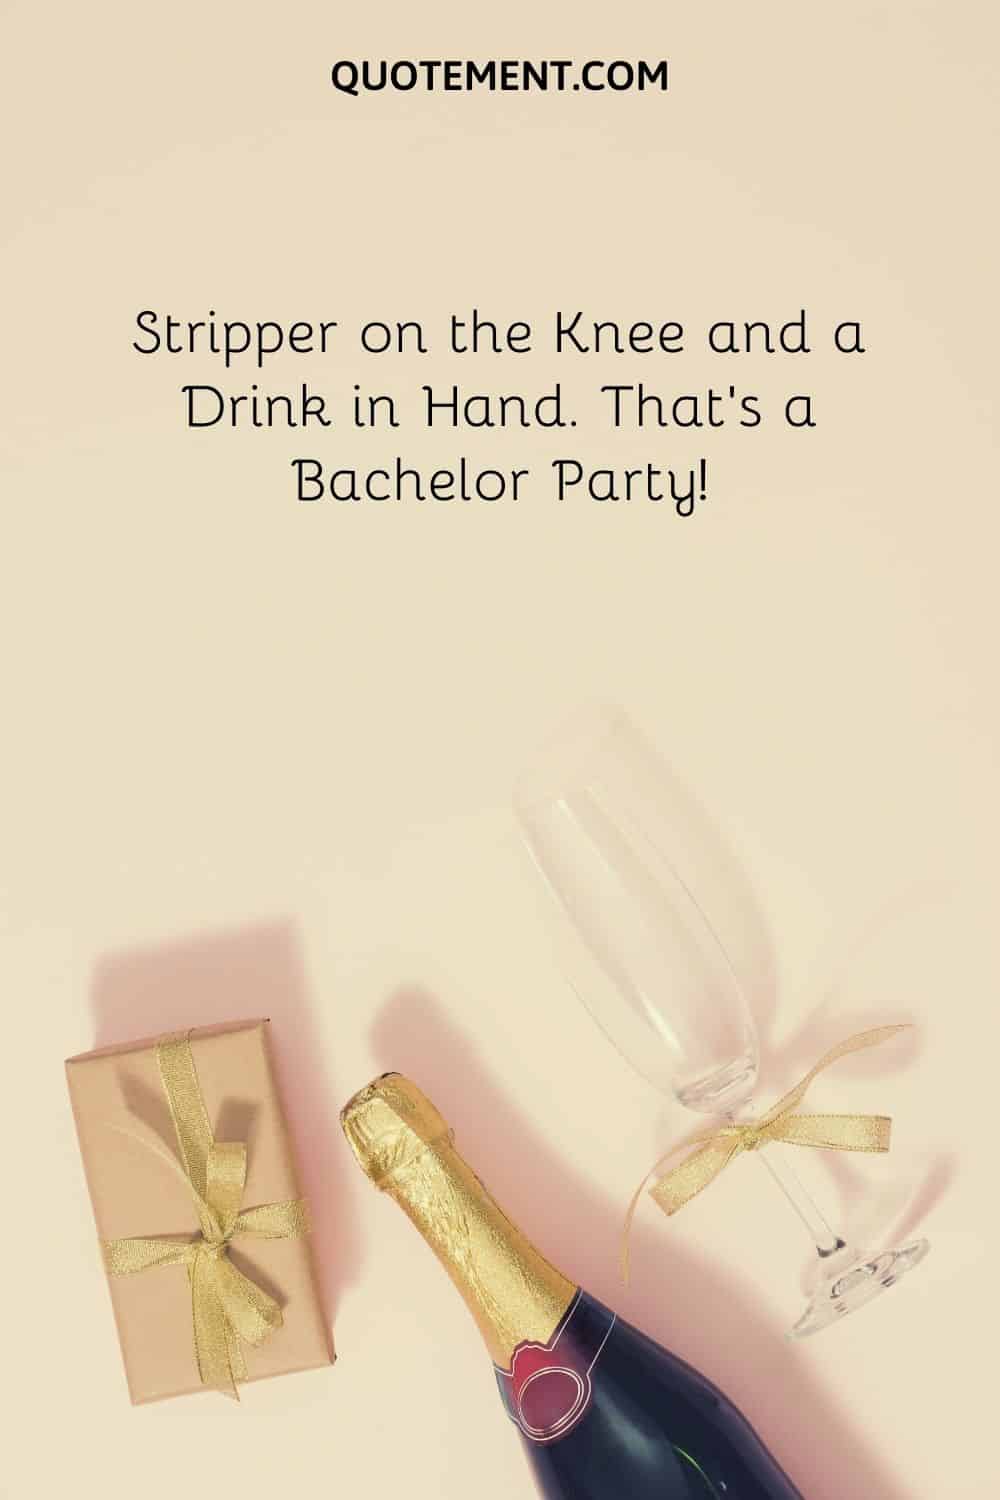 Stripper on the Knee and a Drink in Hand. That's a Bachelor Party